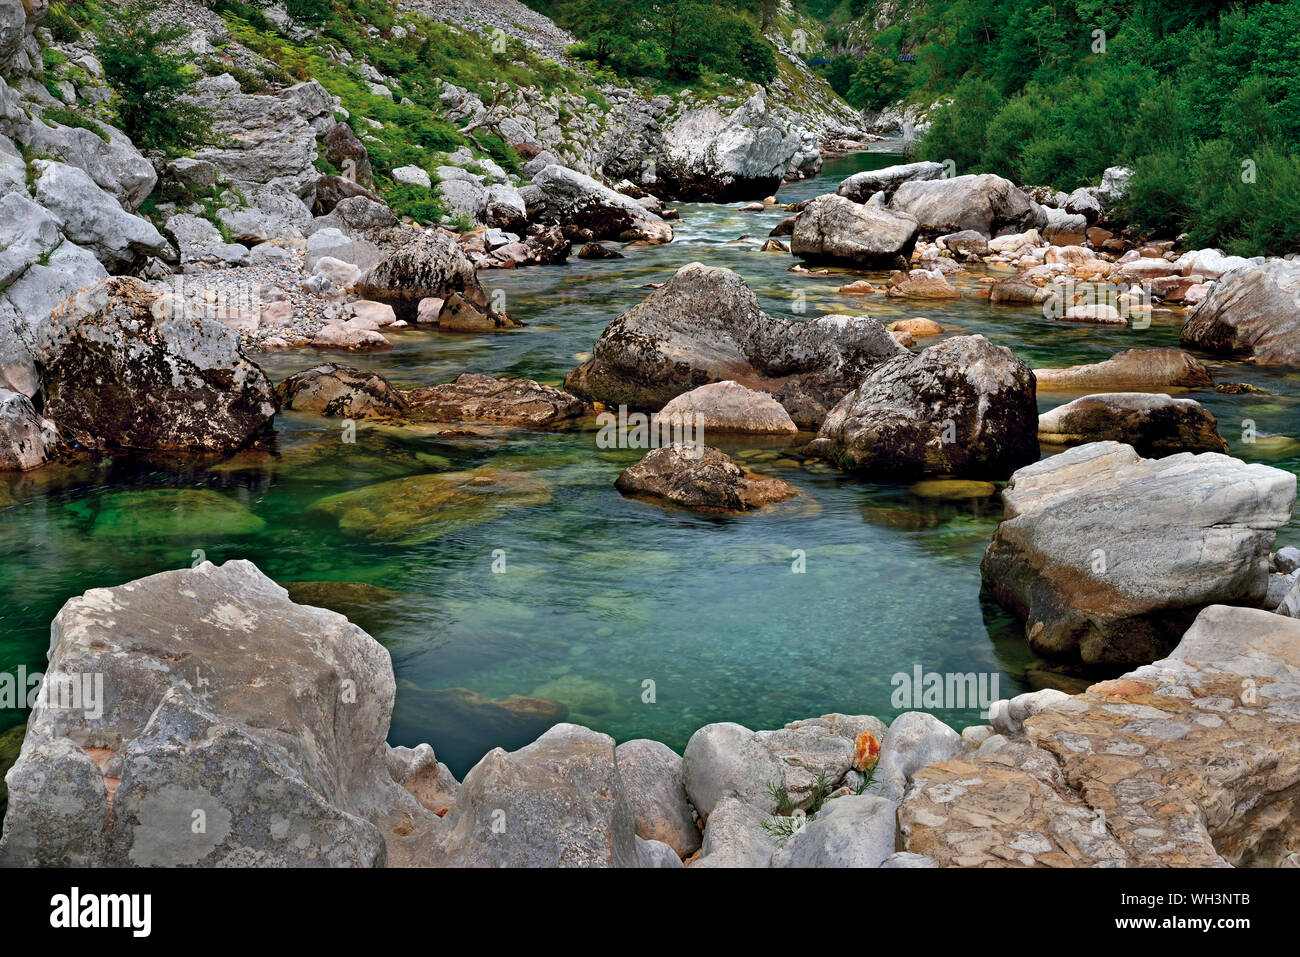 Mountain river with huge rocks and natural water pools Stock Photo